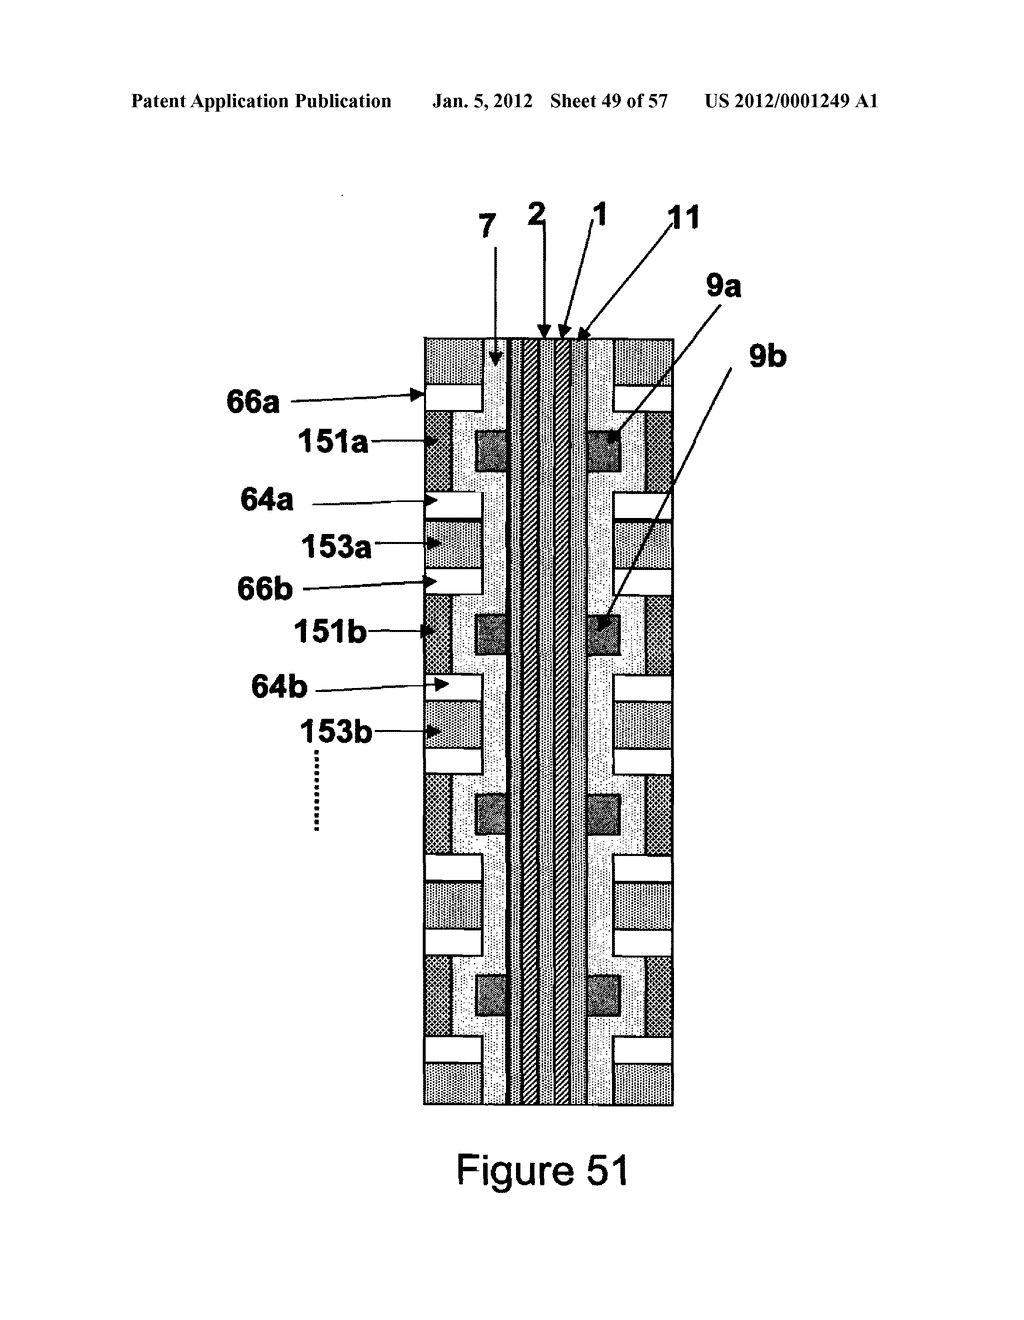 ULTRAHIGH DENSITY VERTICAL NAND MEMORY DEVICE & METHOD OF MAKING THEREOF - diagram, schematic, and image 50